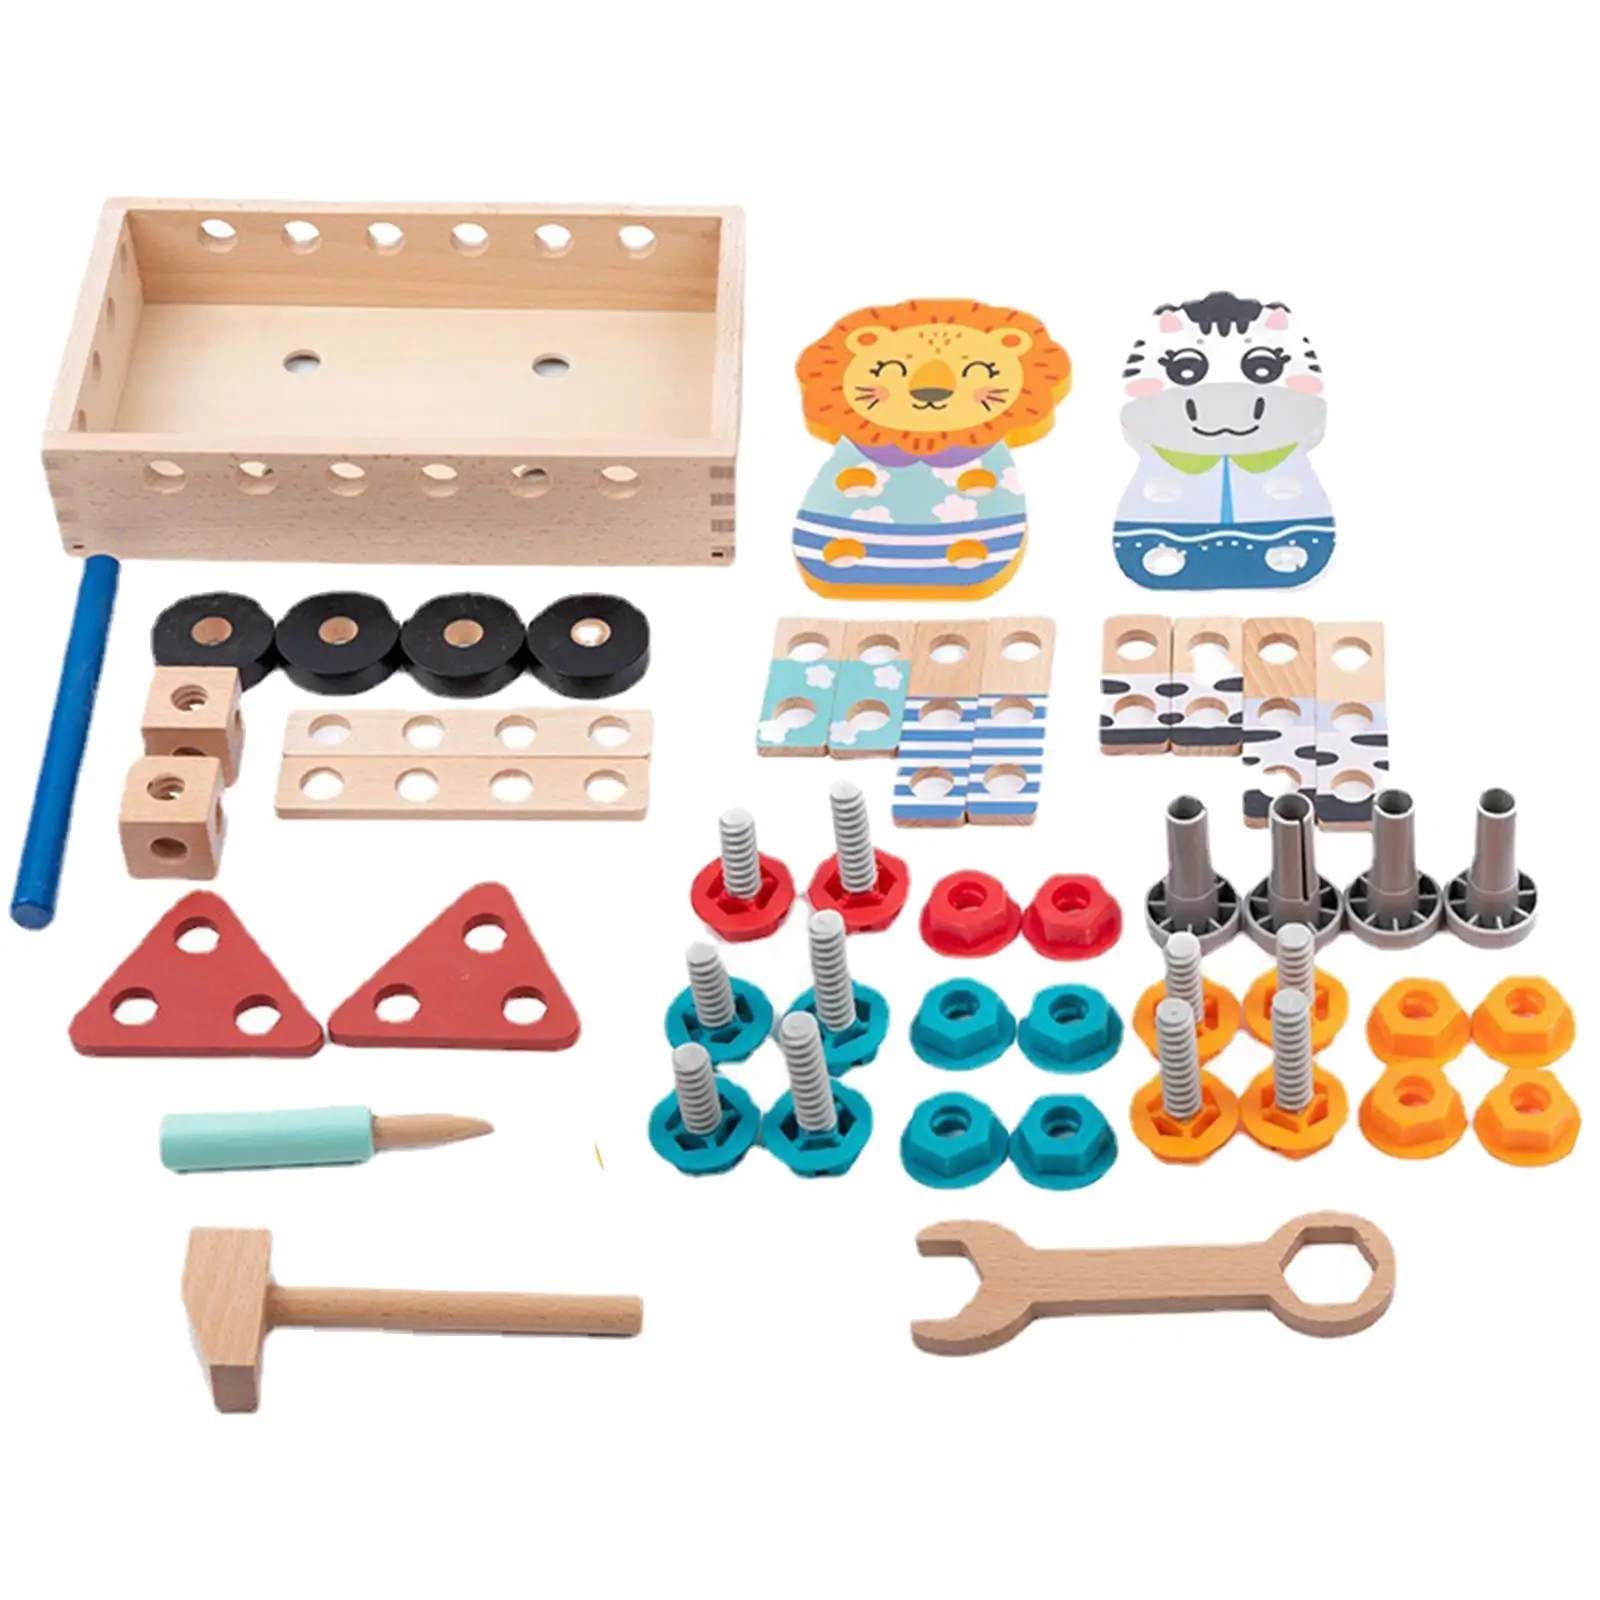 Pretend Game Toolbox Portable Montessori Creative Fine Motor Skills Toddler Tool Set for Activities Education Education Learning